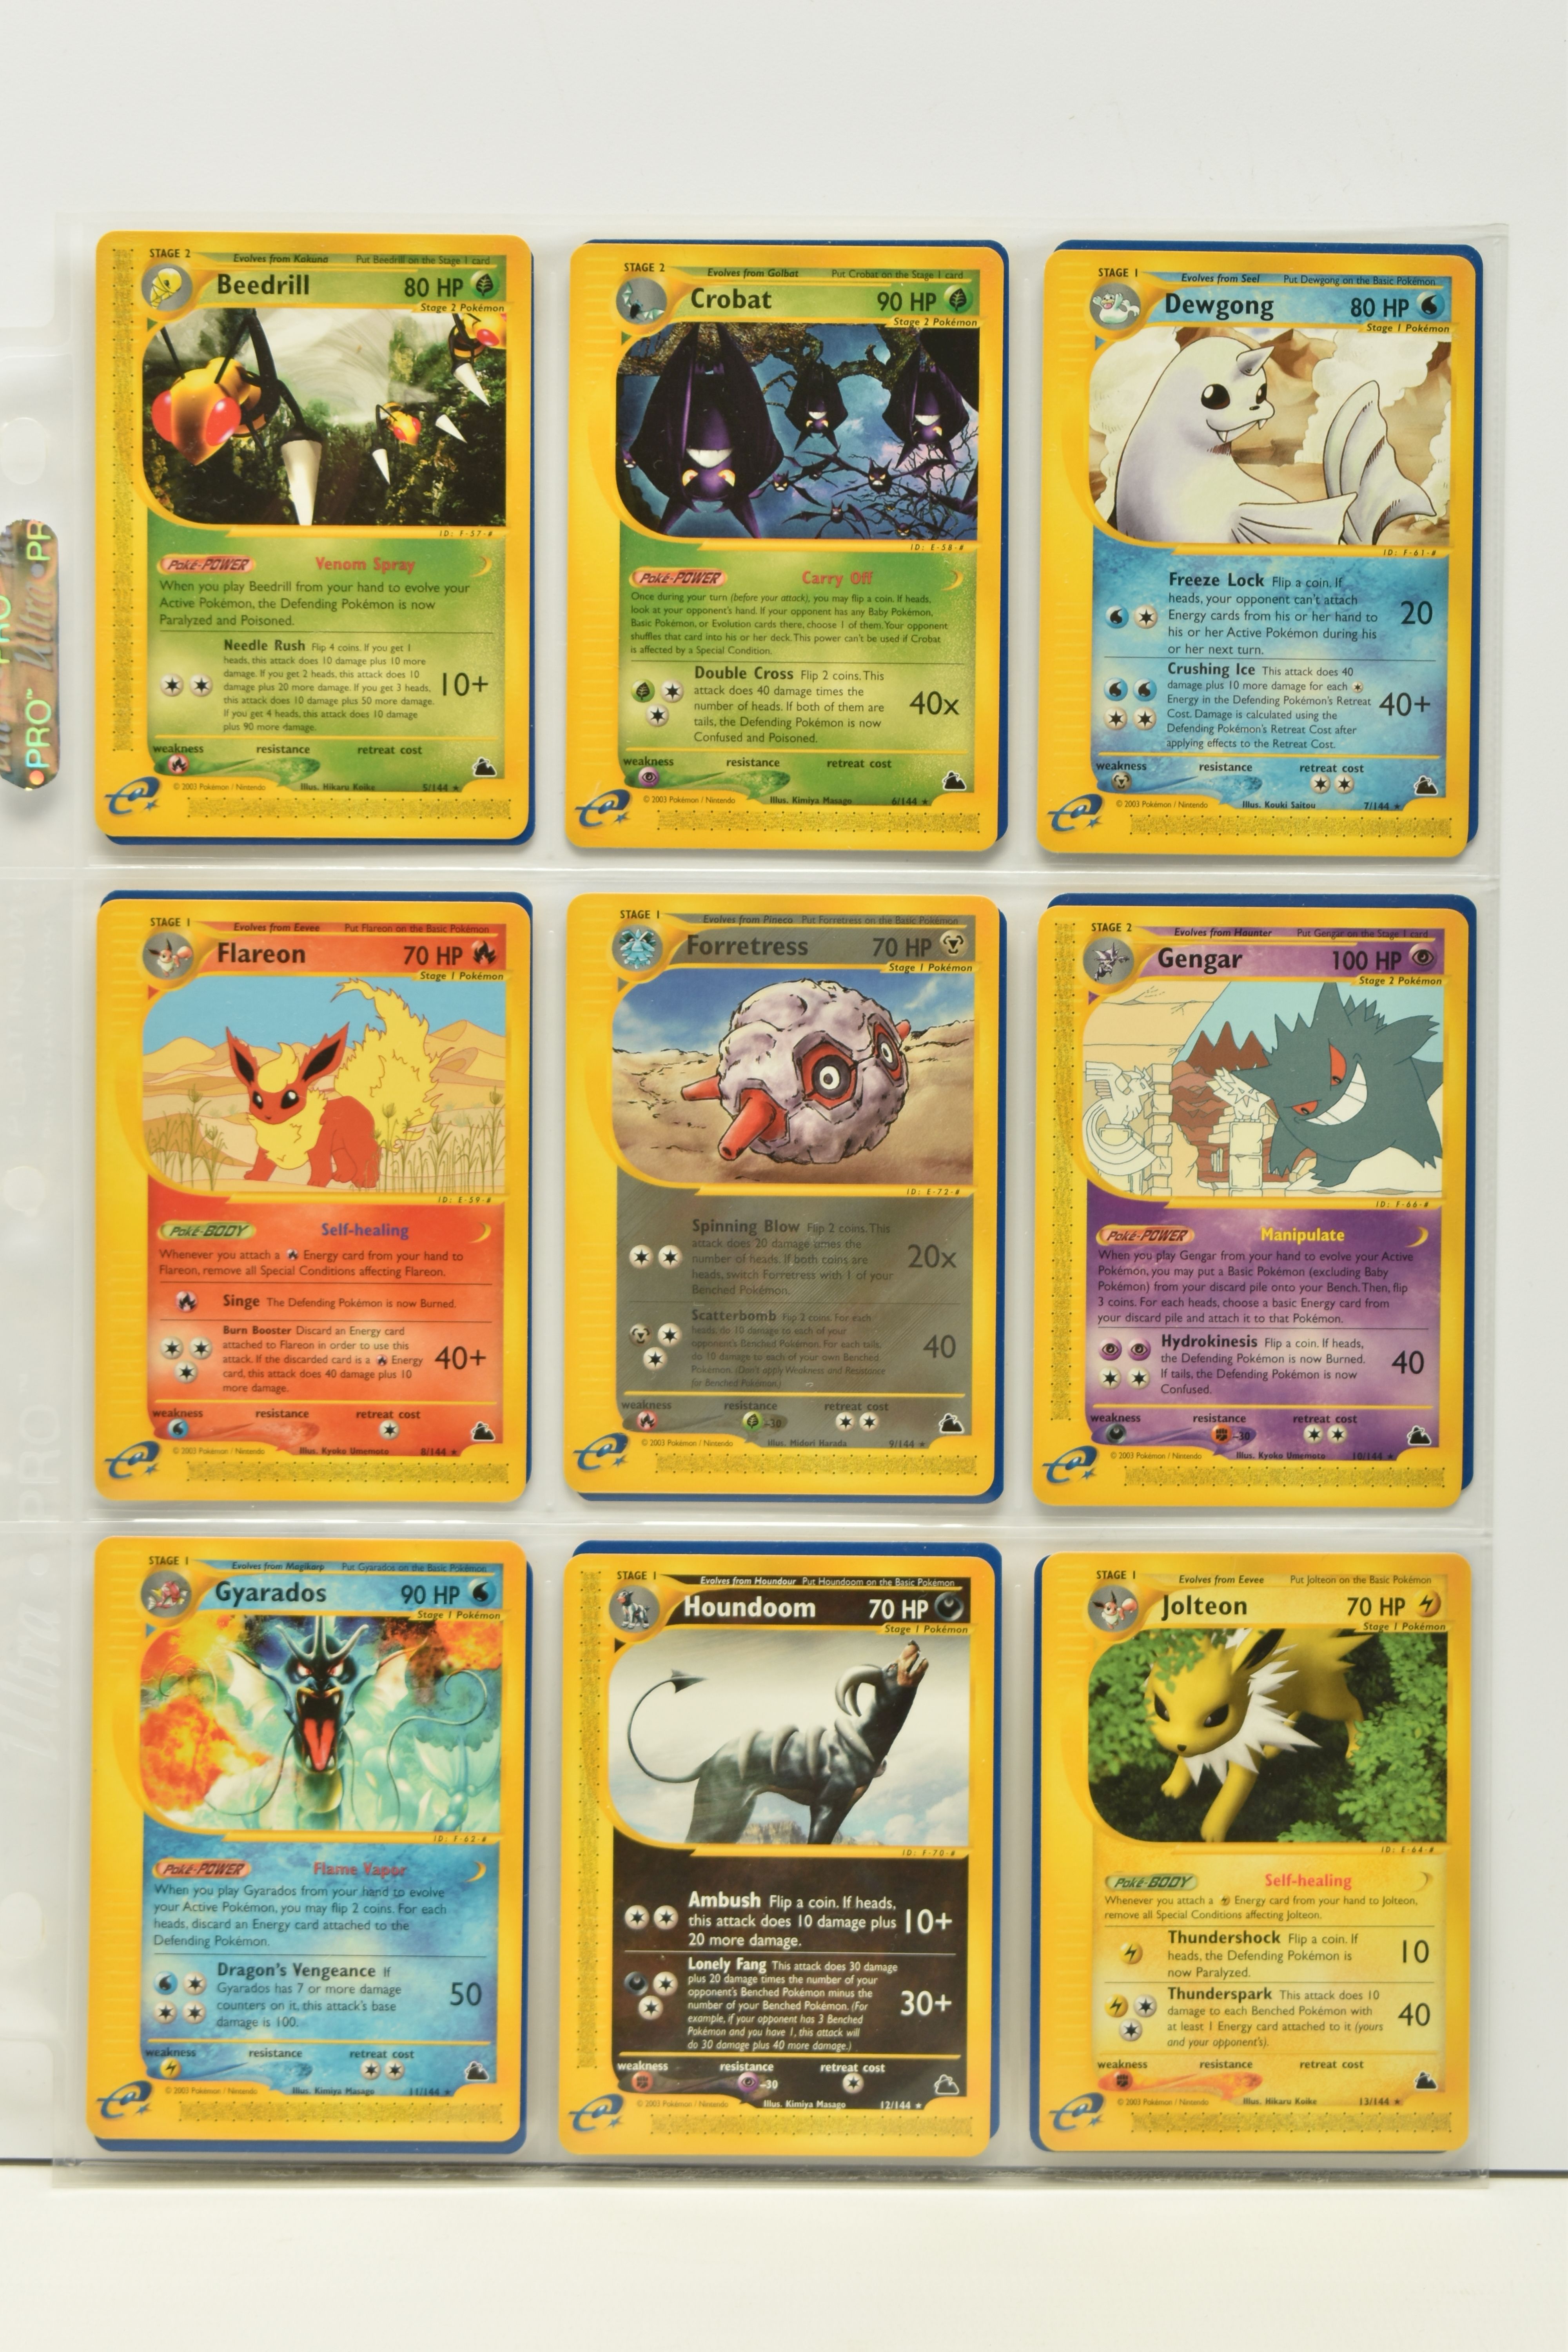 POKEMON COMPLETE SKYRIDGE MASTER SET, all cards are present, including all the secret rare cards and - Image 5 of 37